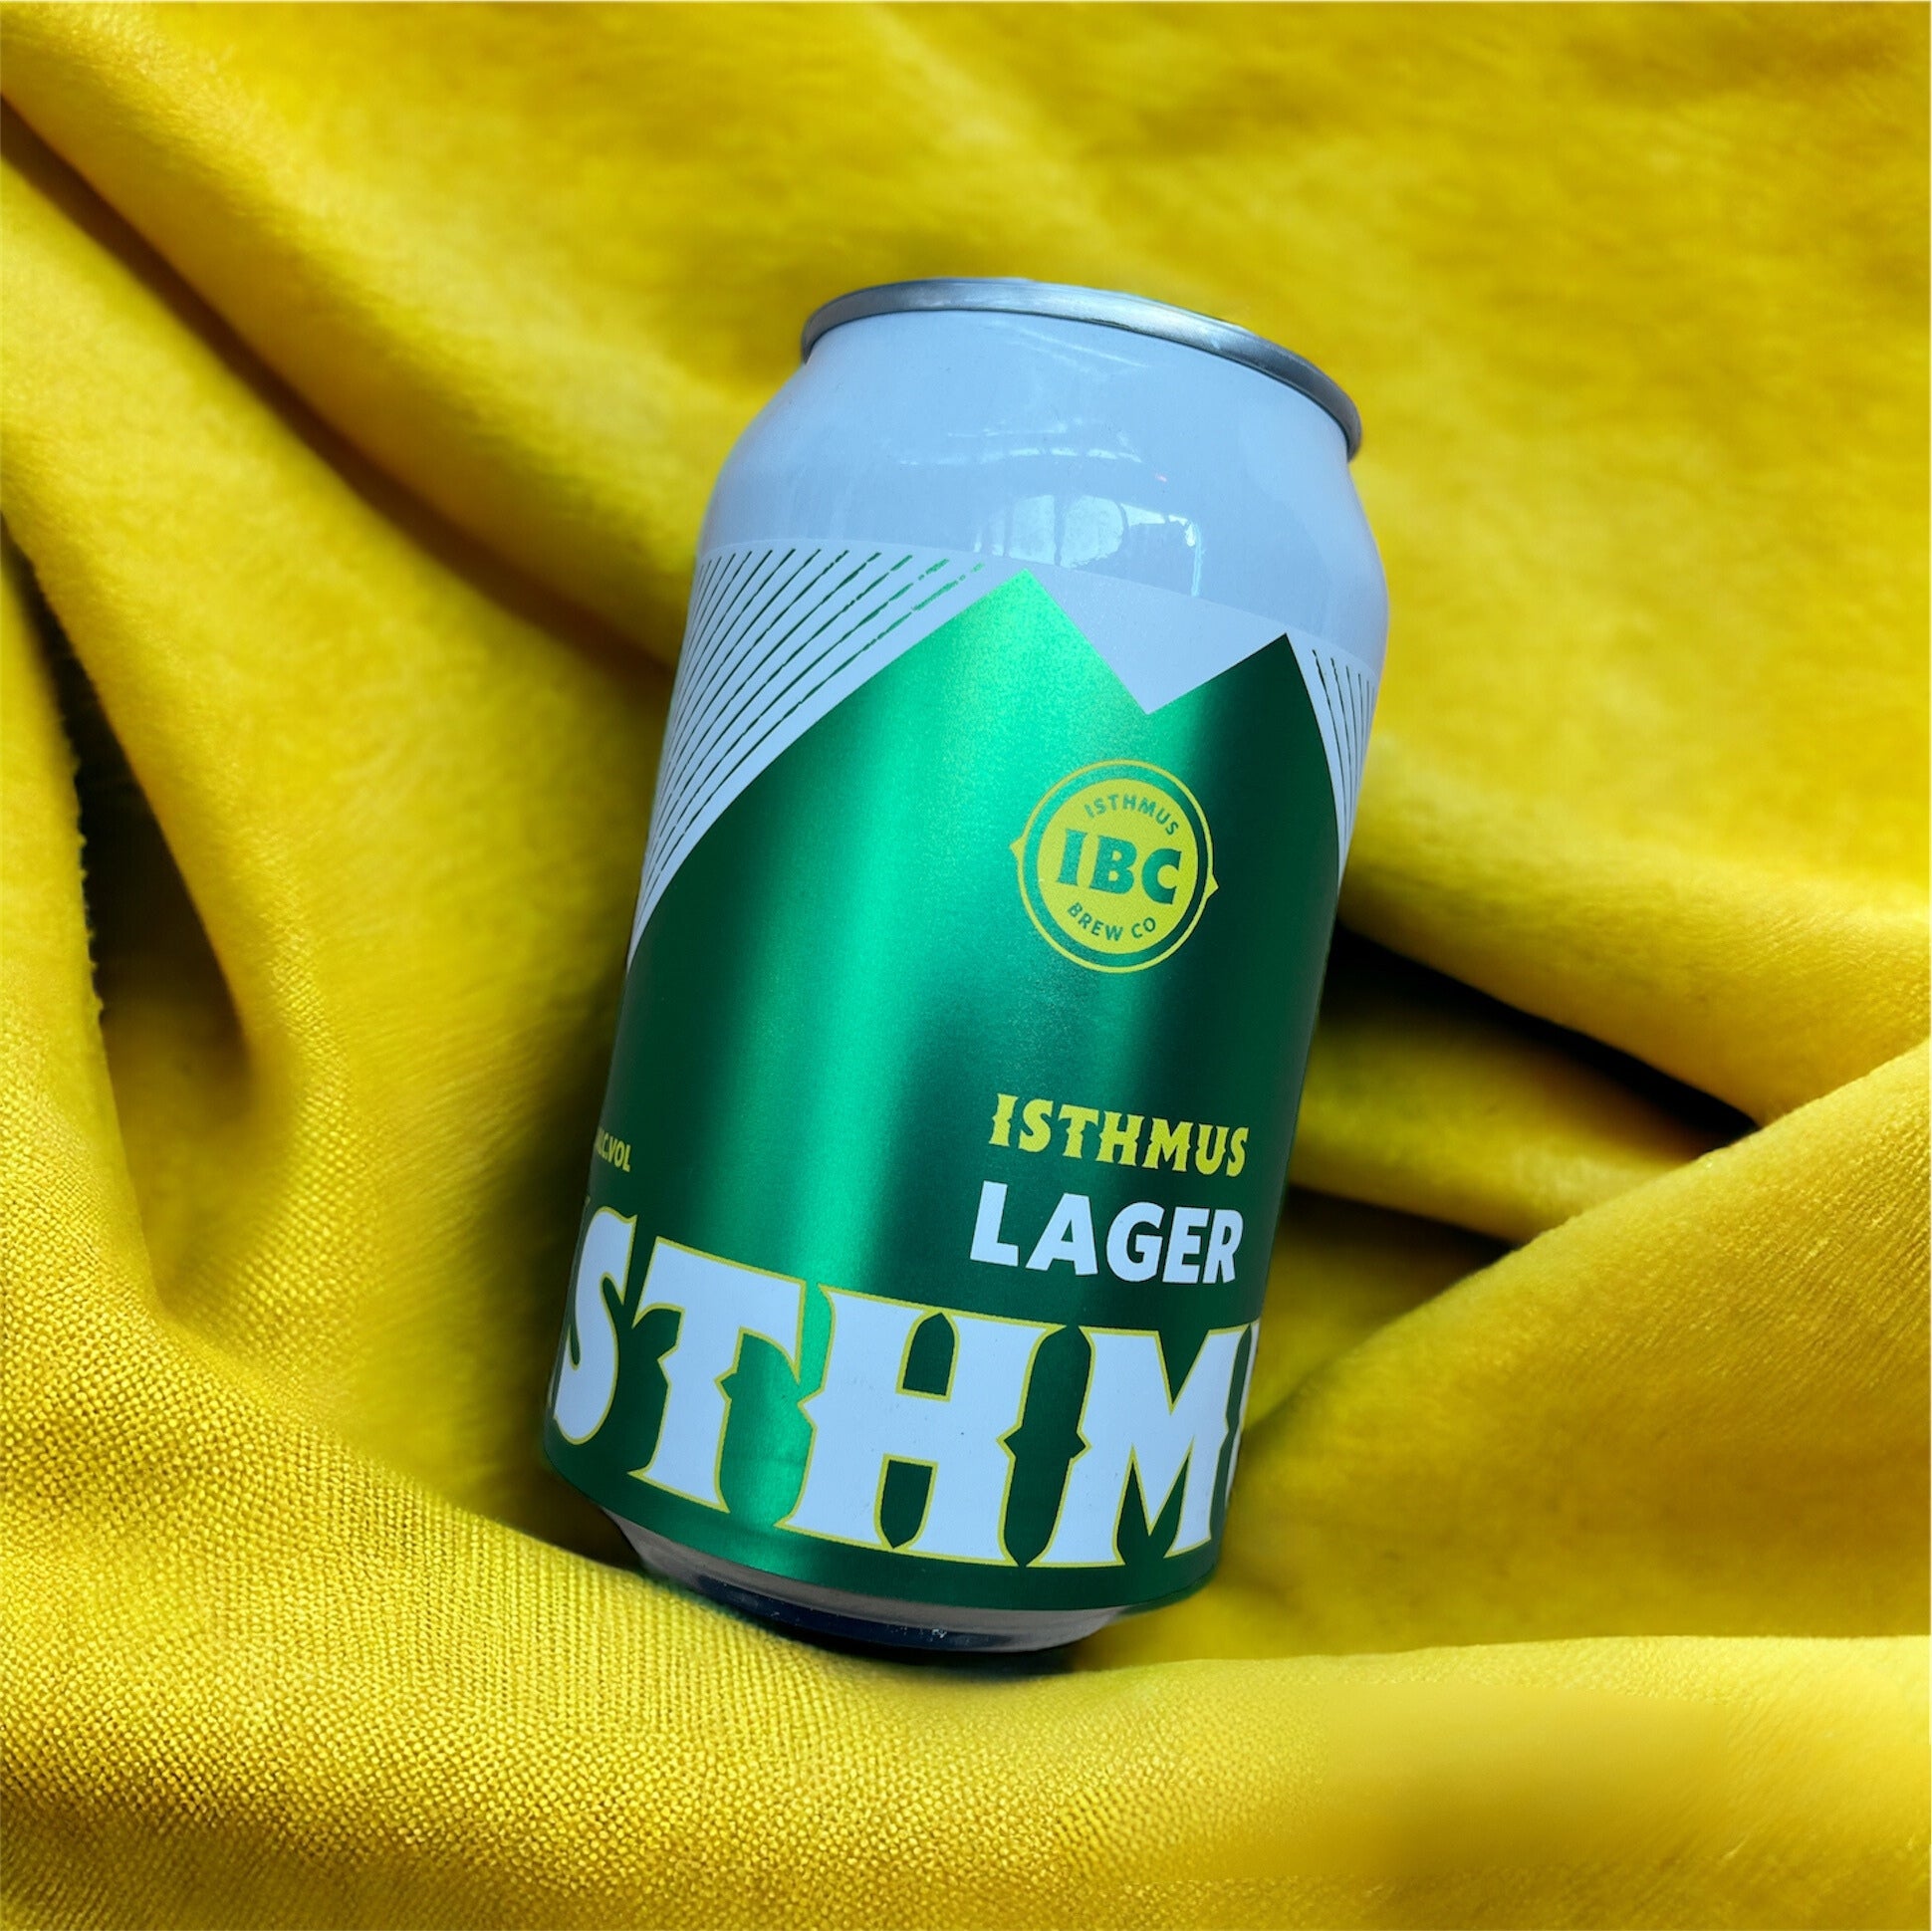 Isthmus Lager